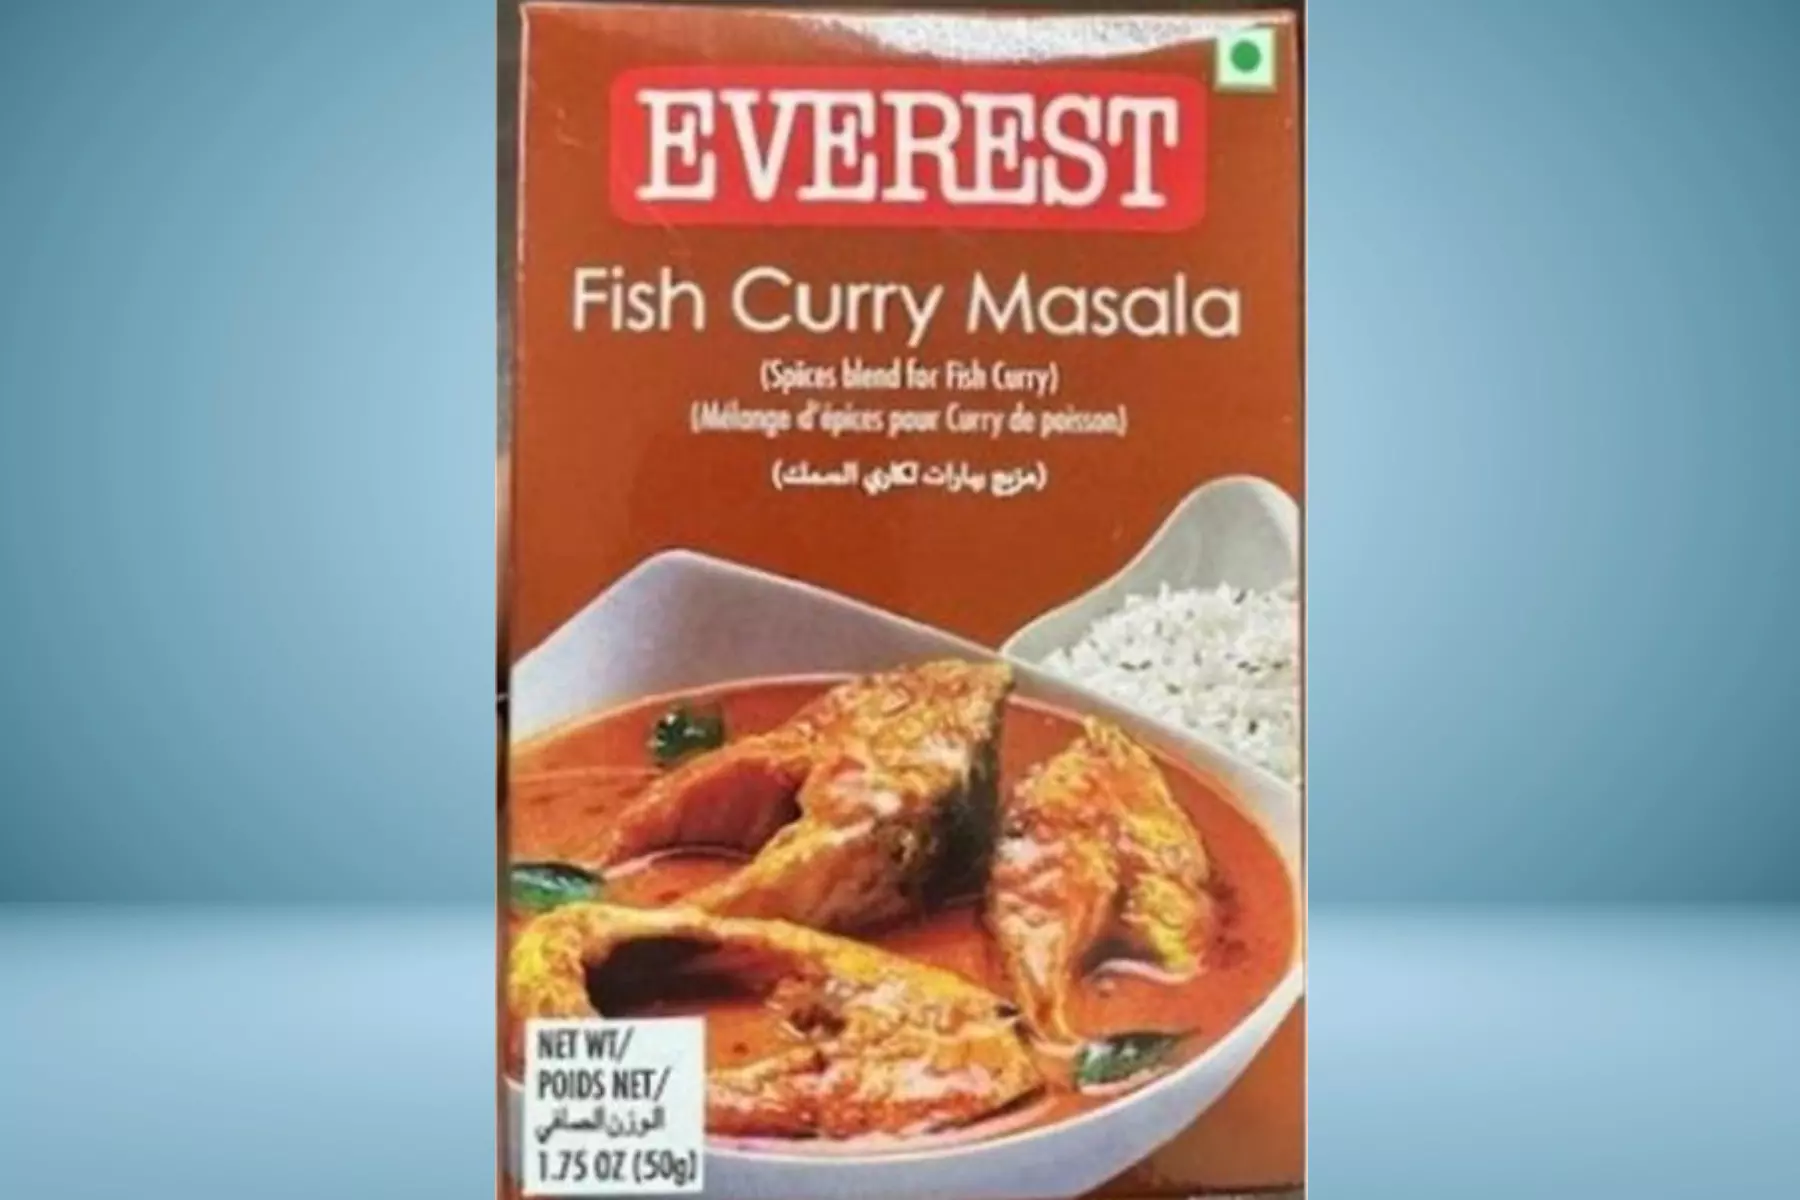 Everest Fish Curry Masala packet.